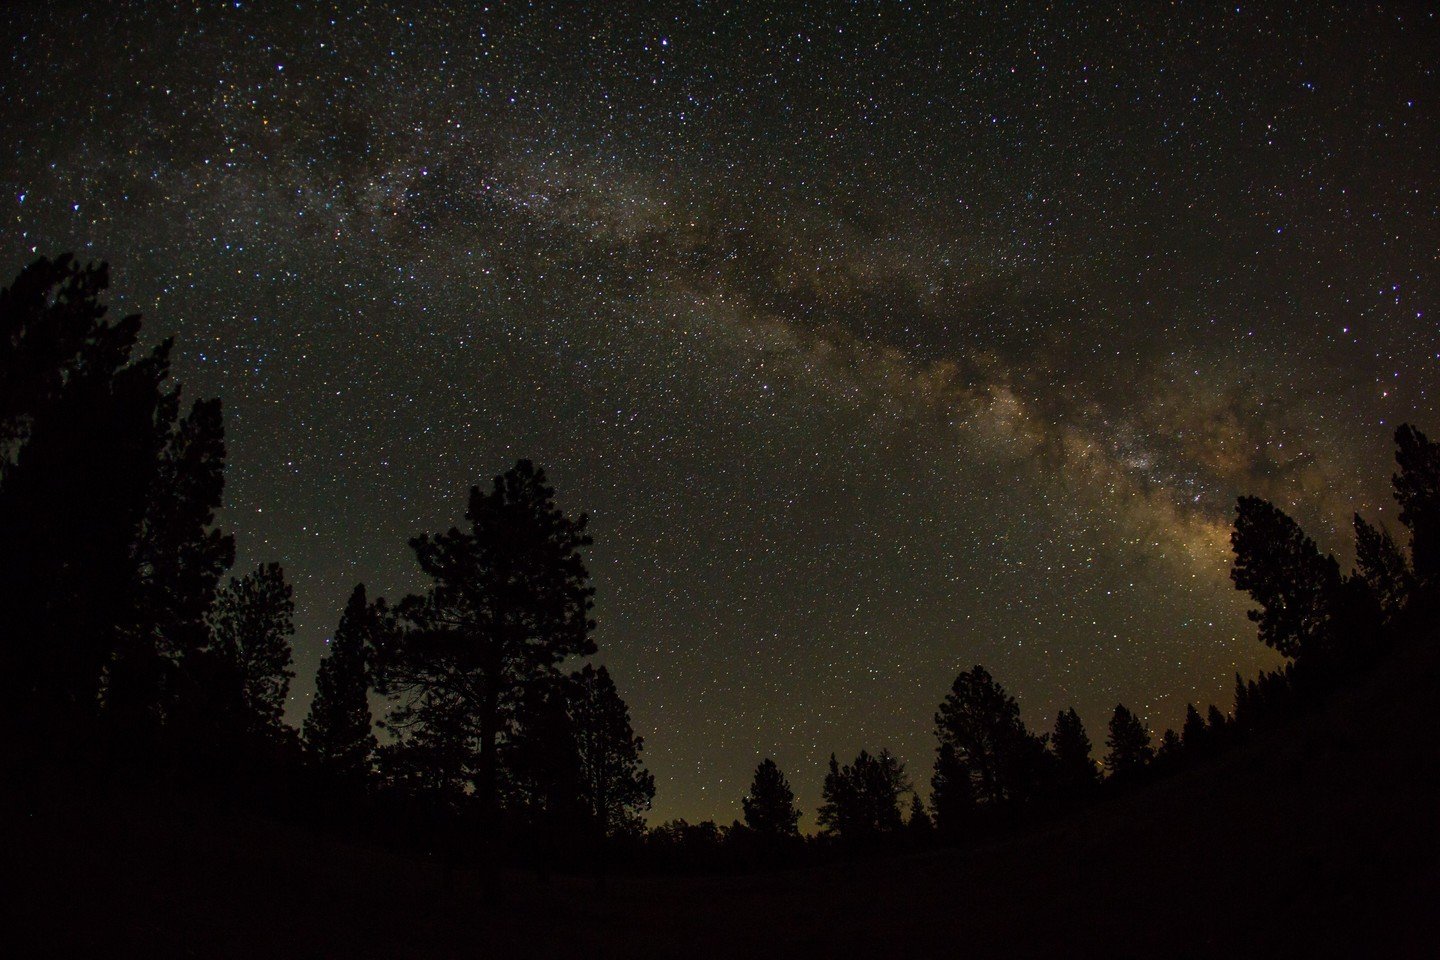 &ldquo;As the population of Oregon and the trend of light pollution continue to rise,  the unparalleled scale and quality of the Outback&rsquo;s dark skies will  long serve as a starry refuge for people and wildlife alike.&rdquo; - Dawn Nilson, Envir